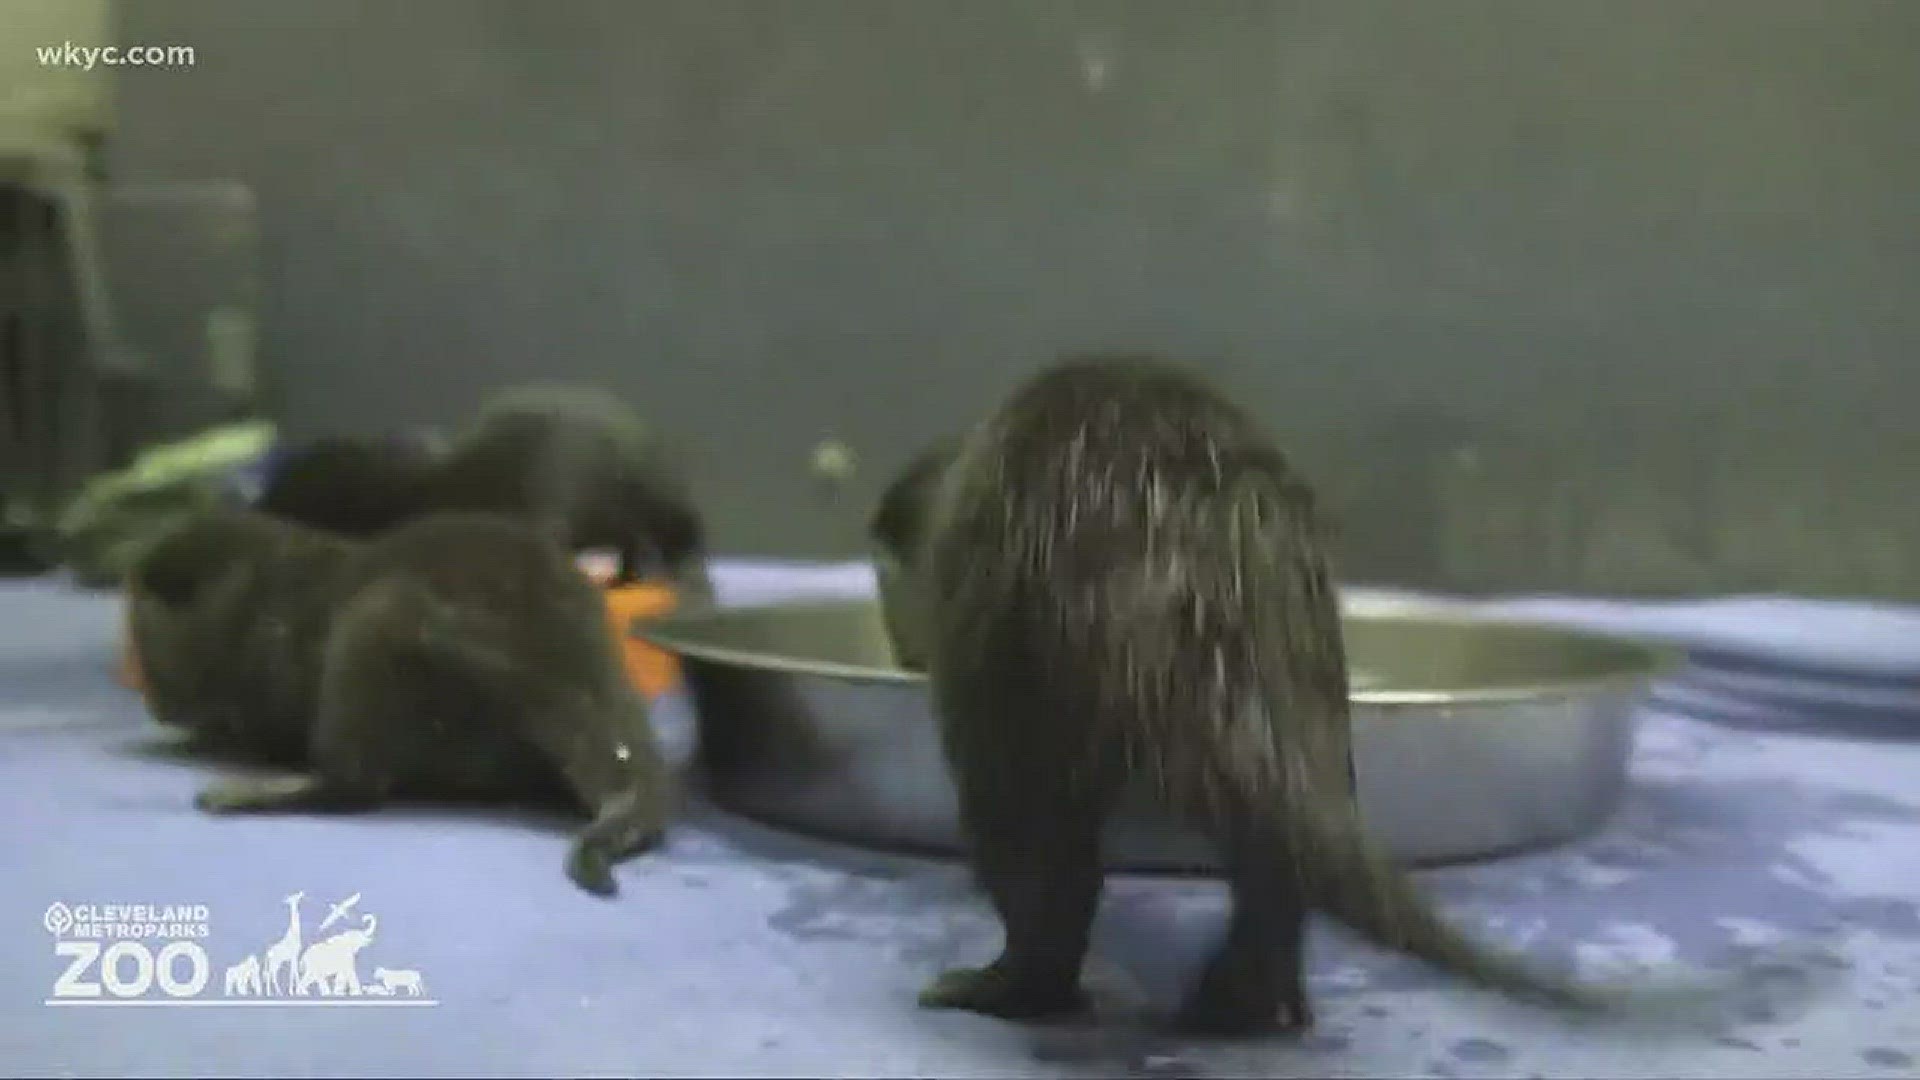 Cleveland Zoo's baby otters continue to be internet sensations